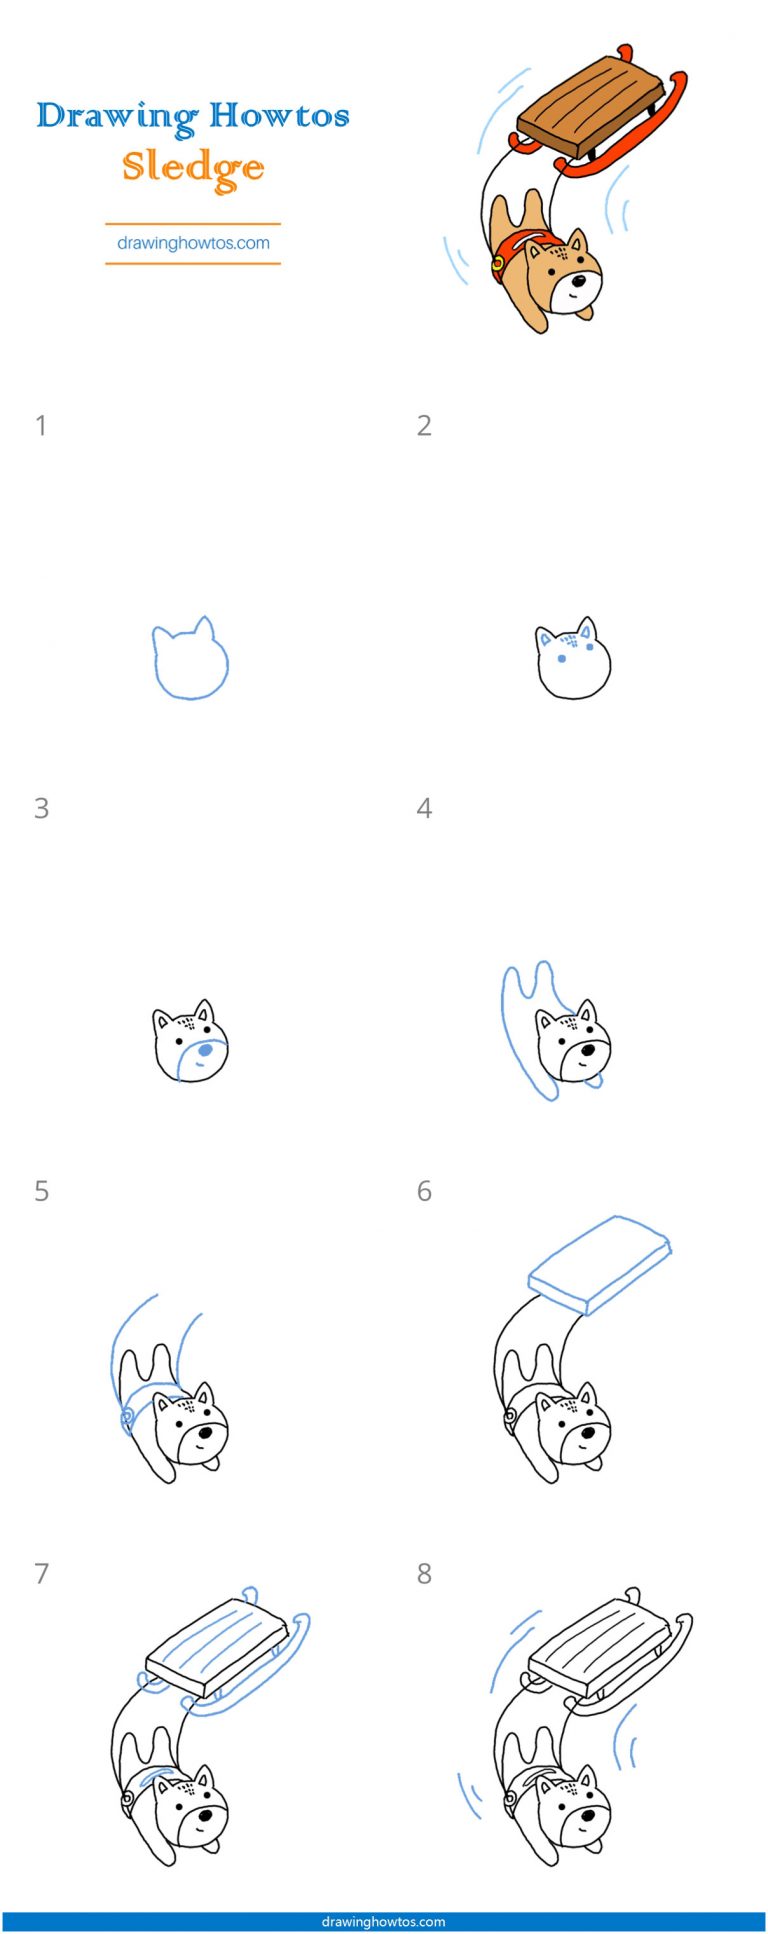 How to Draw Dog Sledding Step by Step Easy Drawing Guides Drawing